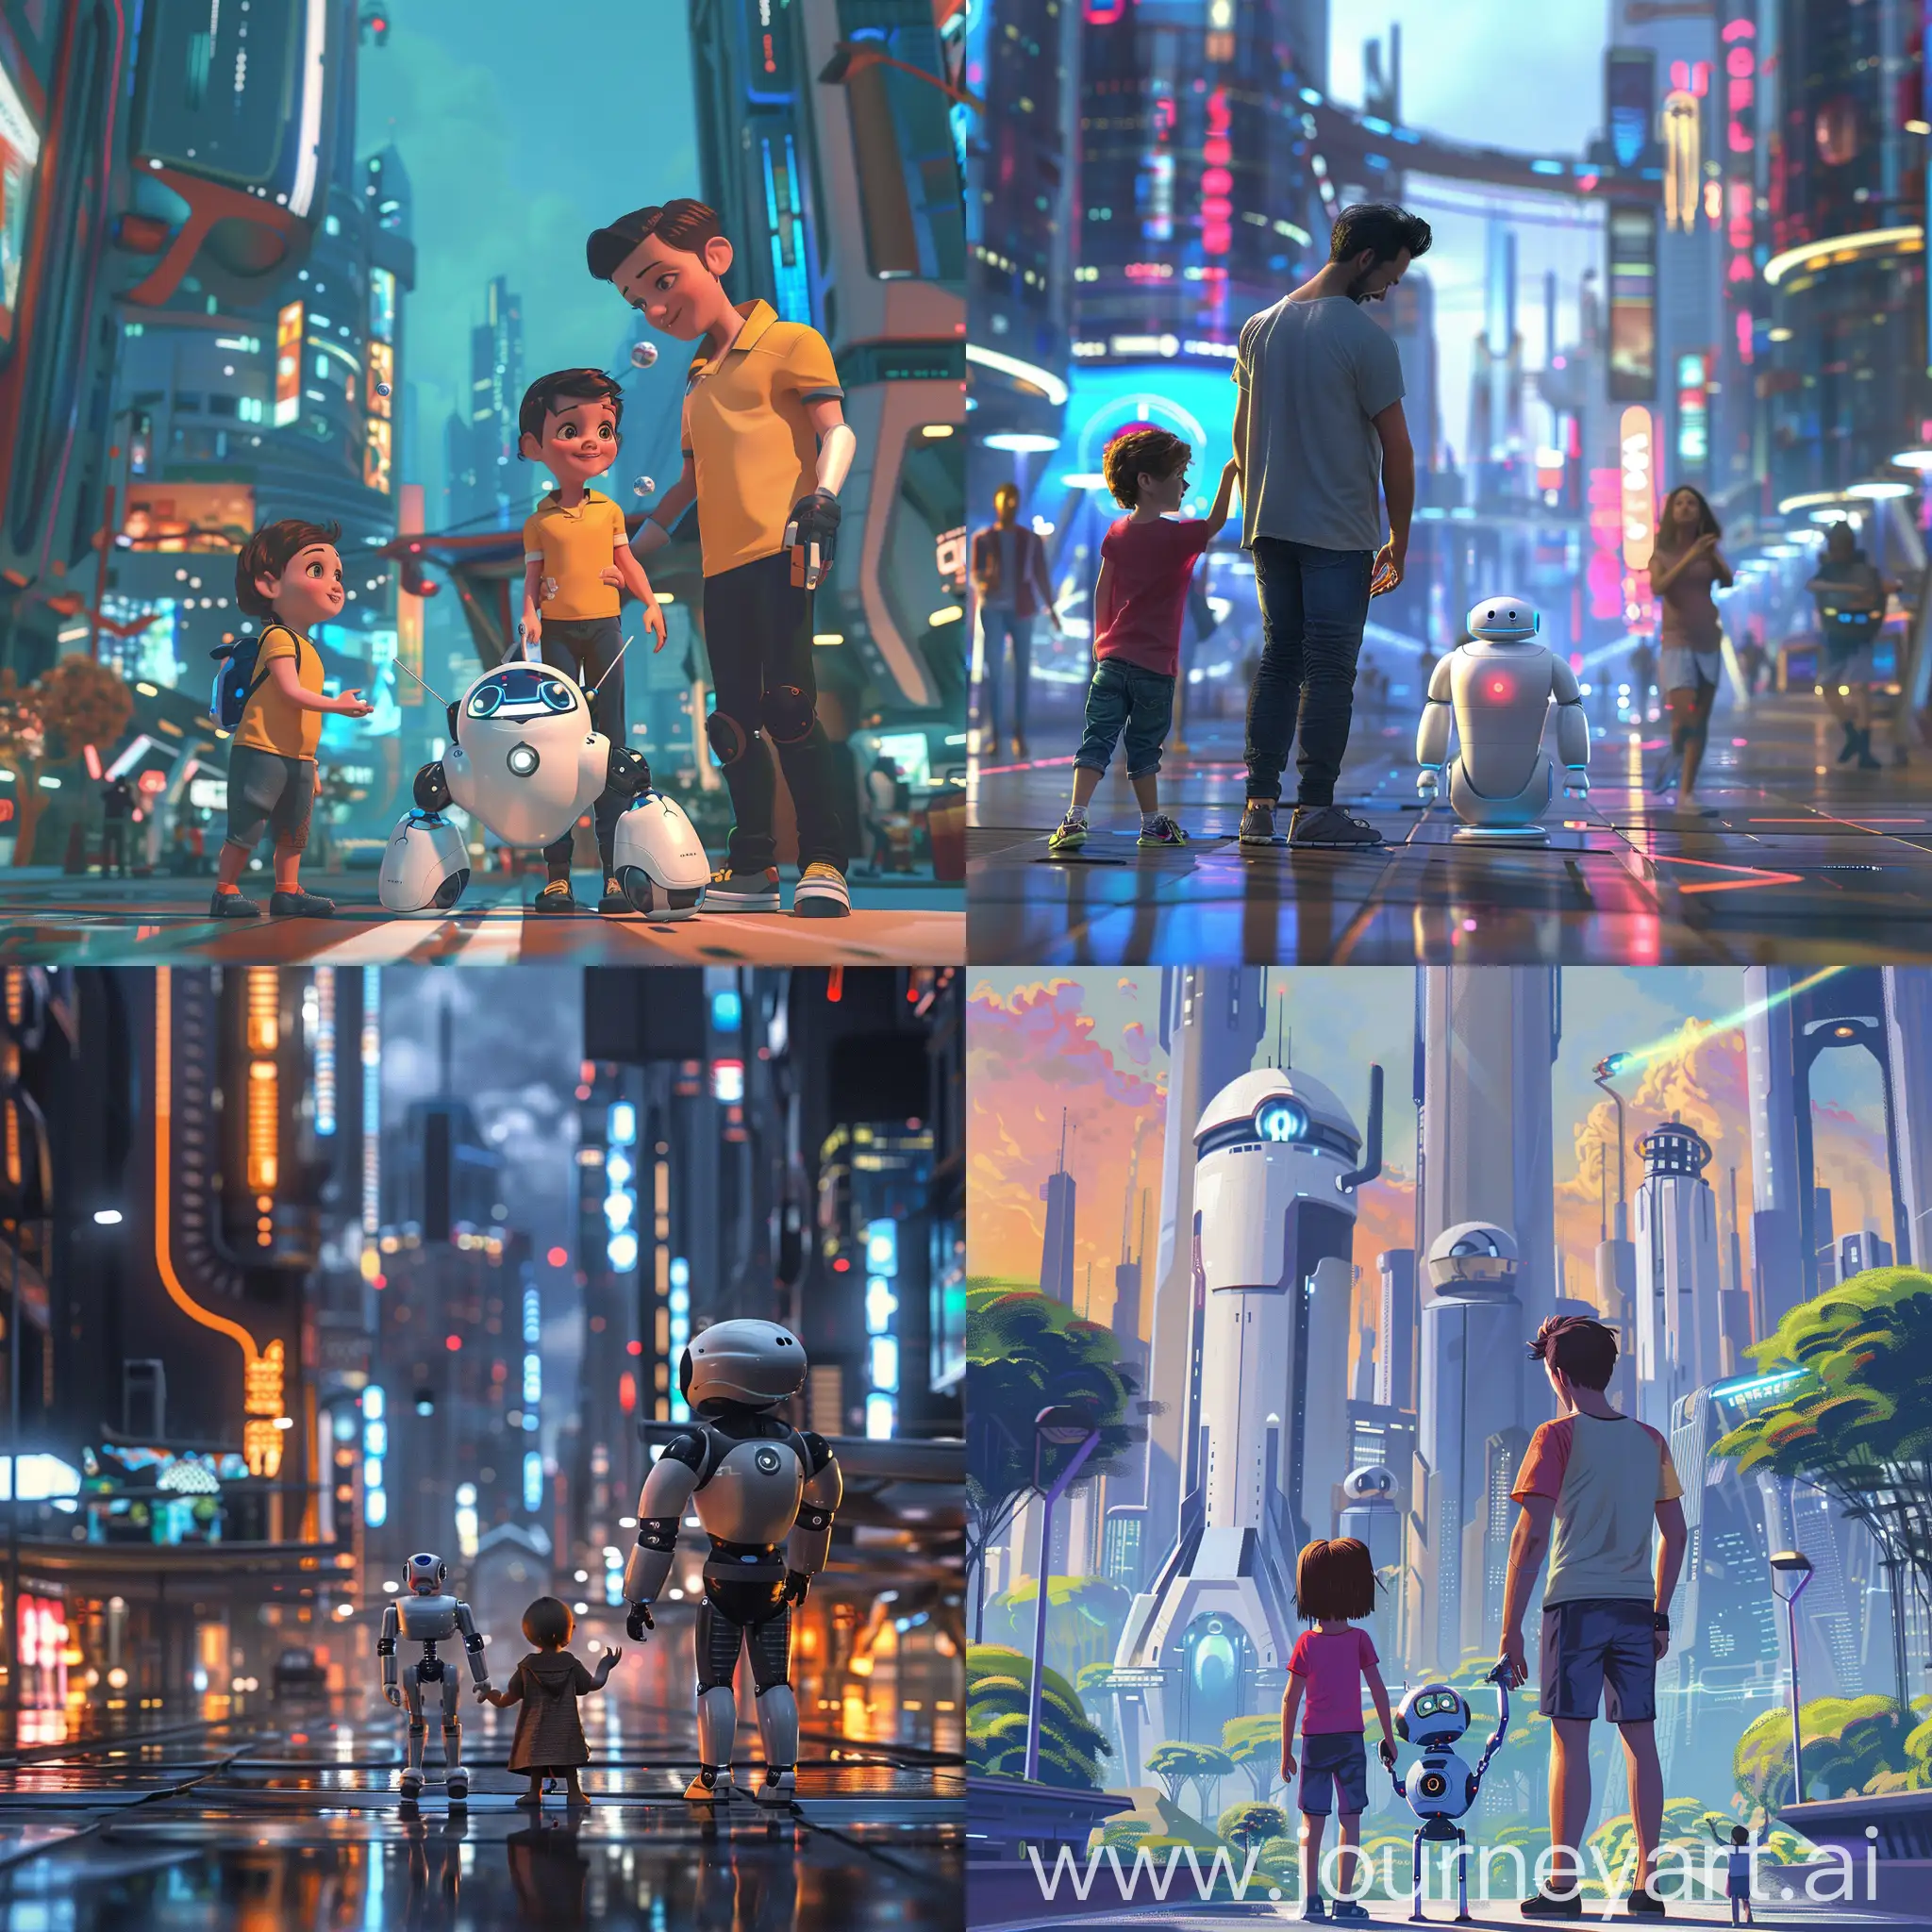 Exploring-Futuristic-City-Young-Urban-Family-and-Robot-Adventure